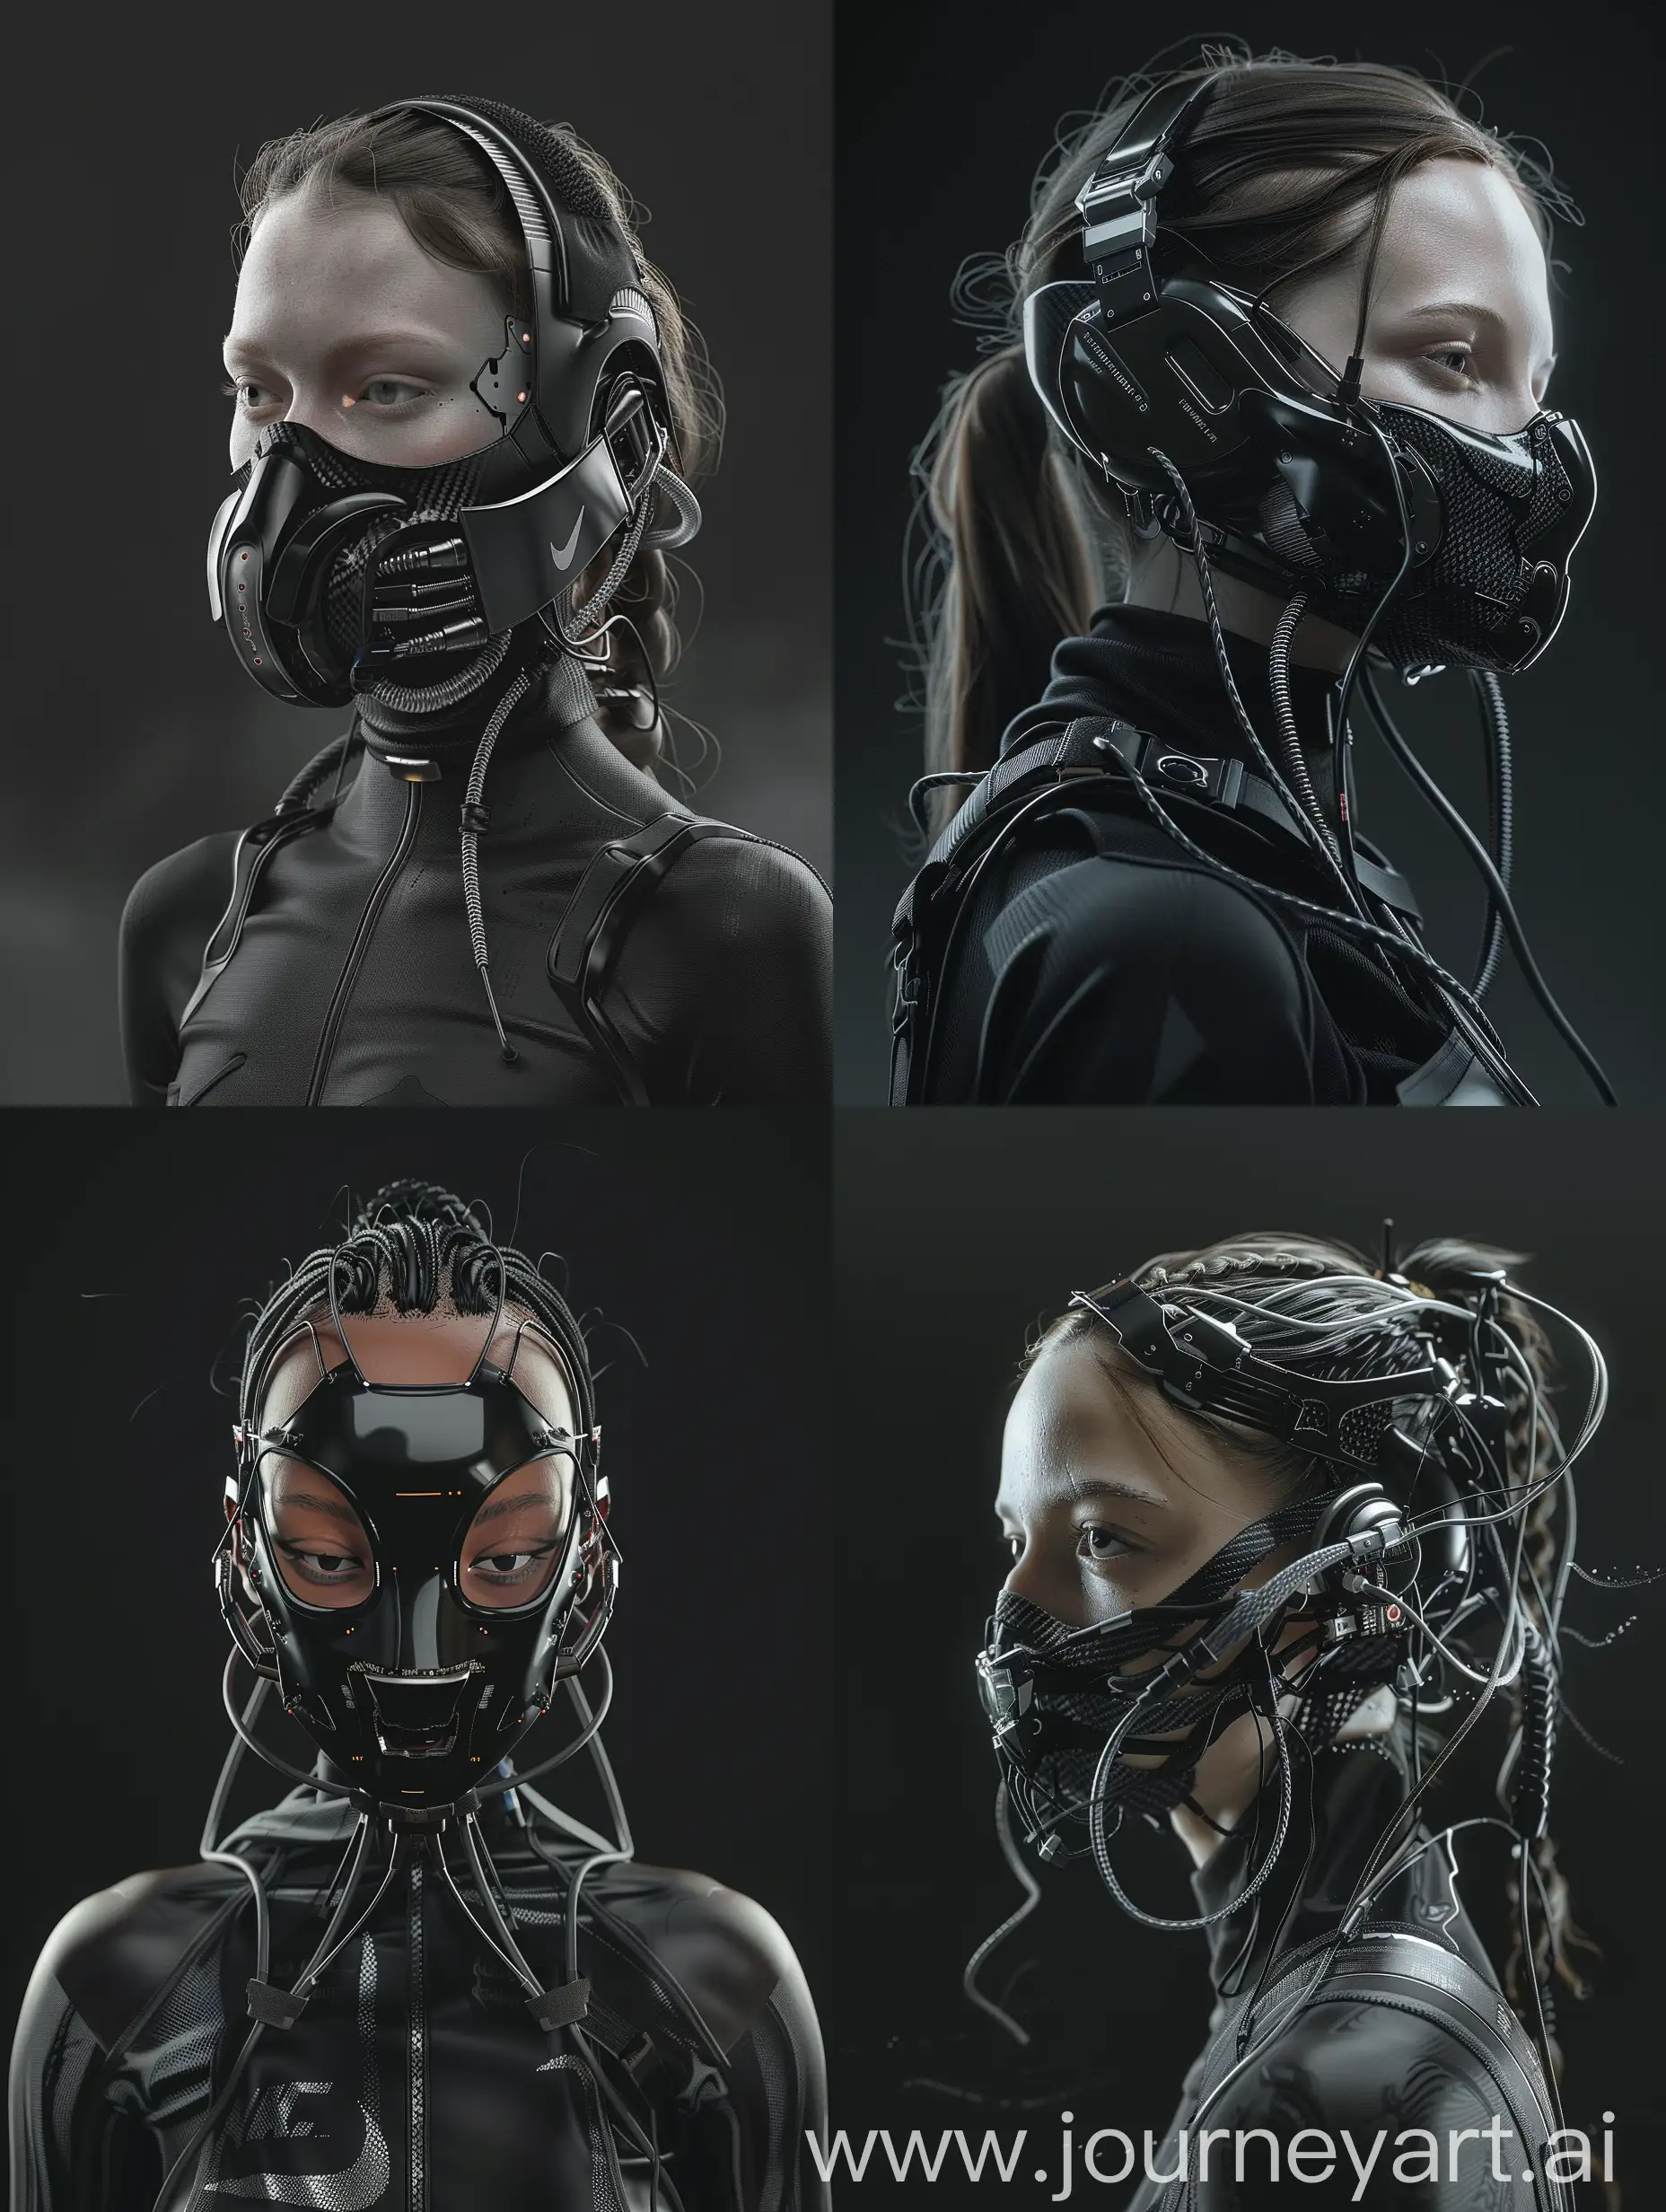 Against a sleek black backdrop, behold a mesmerizing character adorned with a cybernetic mouth-covering mask. It seamlessly blends cutting-edge technology with intricate details, boasting carbon fiber textures, sleek aluminum accents, and wires. Symbolizing the delicate balance between humanity and machine, her appearance embodies the essence of a futuristic cyberpunk aesthetic, enhanced with Nike-inspired add-ons. With dynamic movements reminiscent of action film sequences and cinematic haze, her presence captivates with its irresistible allure.--v1